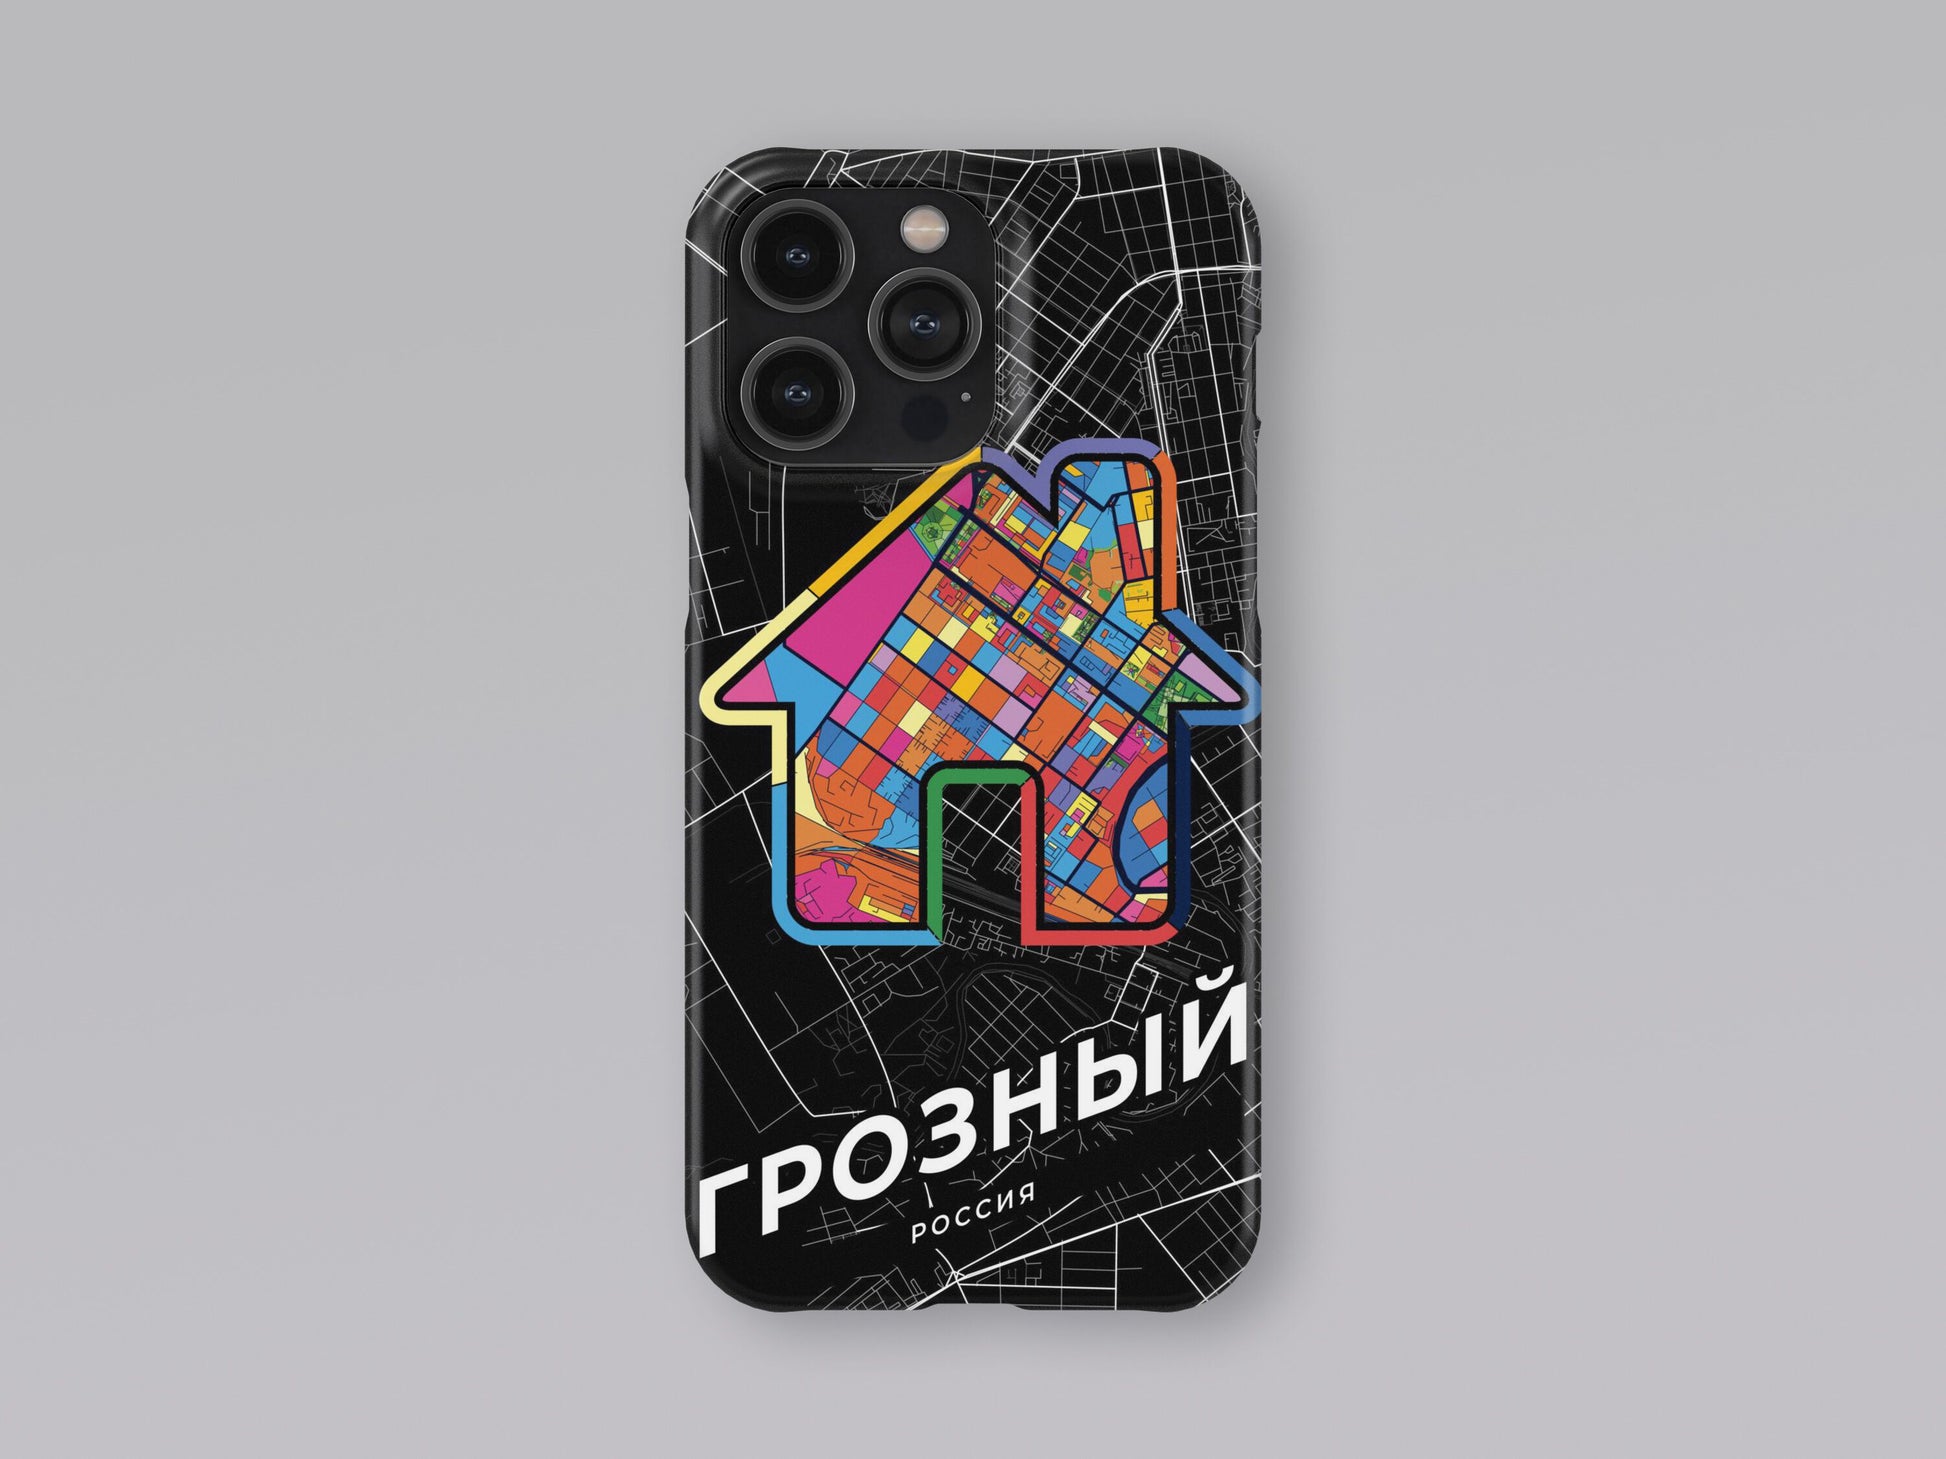 Grozny Russia slim phone case with colorful icon. Birthday, wedding or housewarming gift. Couple match cases. 3